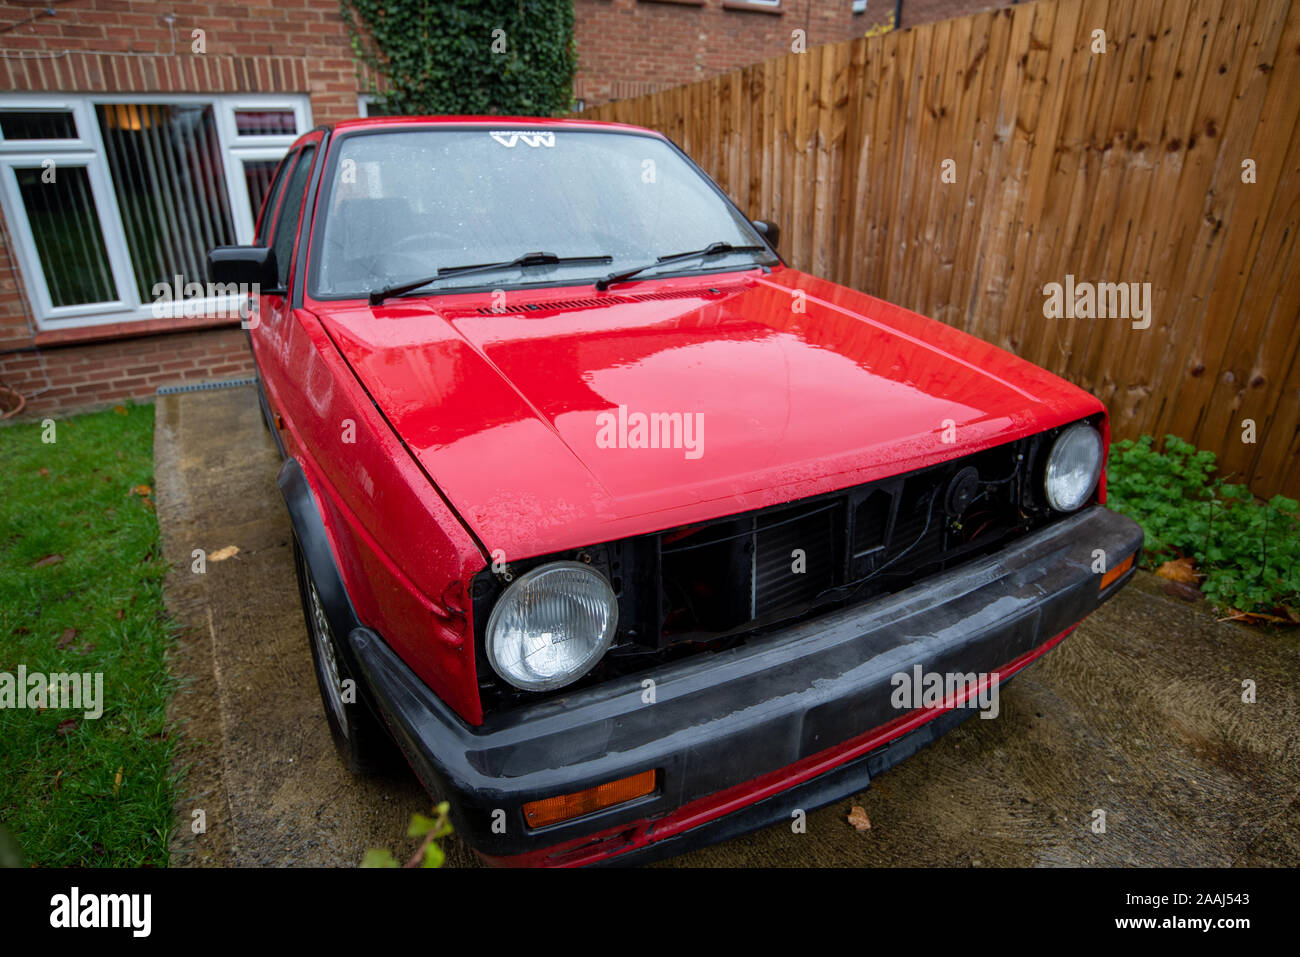 Zichzelf plank helder Classic Volkswagen Golf GTI red: Car crash damage and details close up.  Crushed metal and plastic. Front bumper damage after a road traffic  accident Stock Photo - Alamy